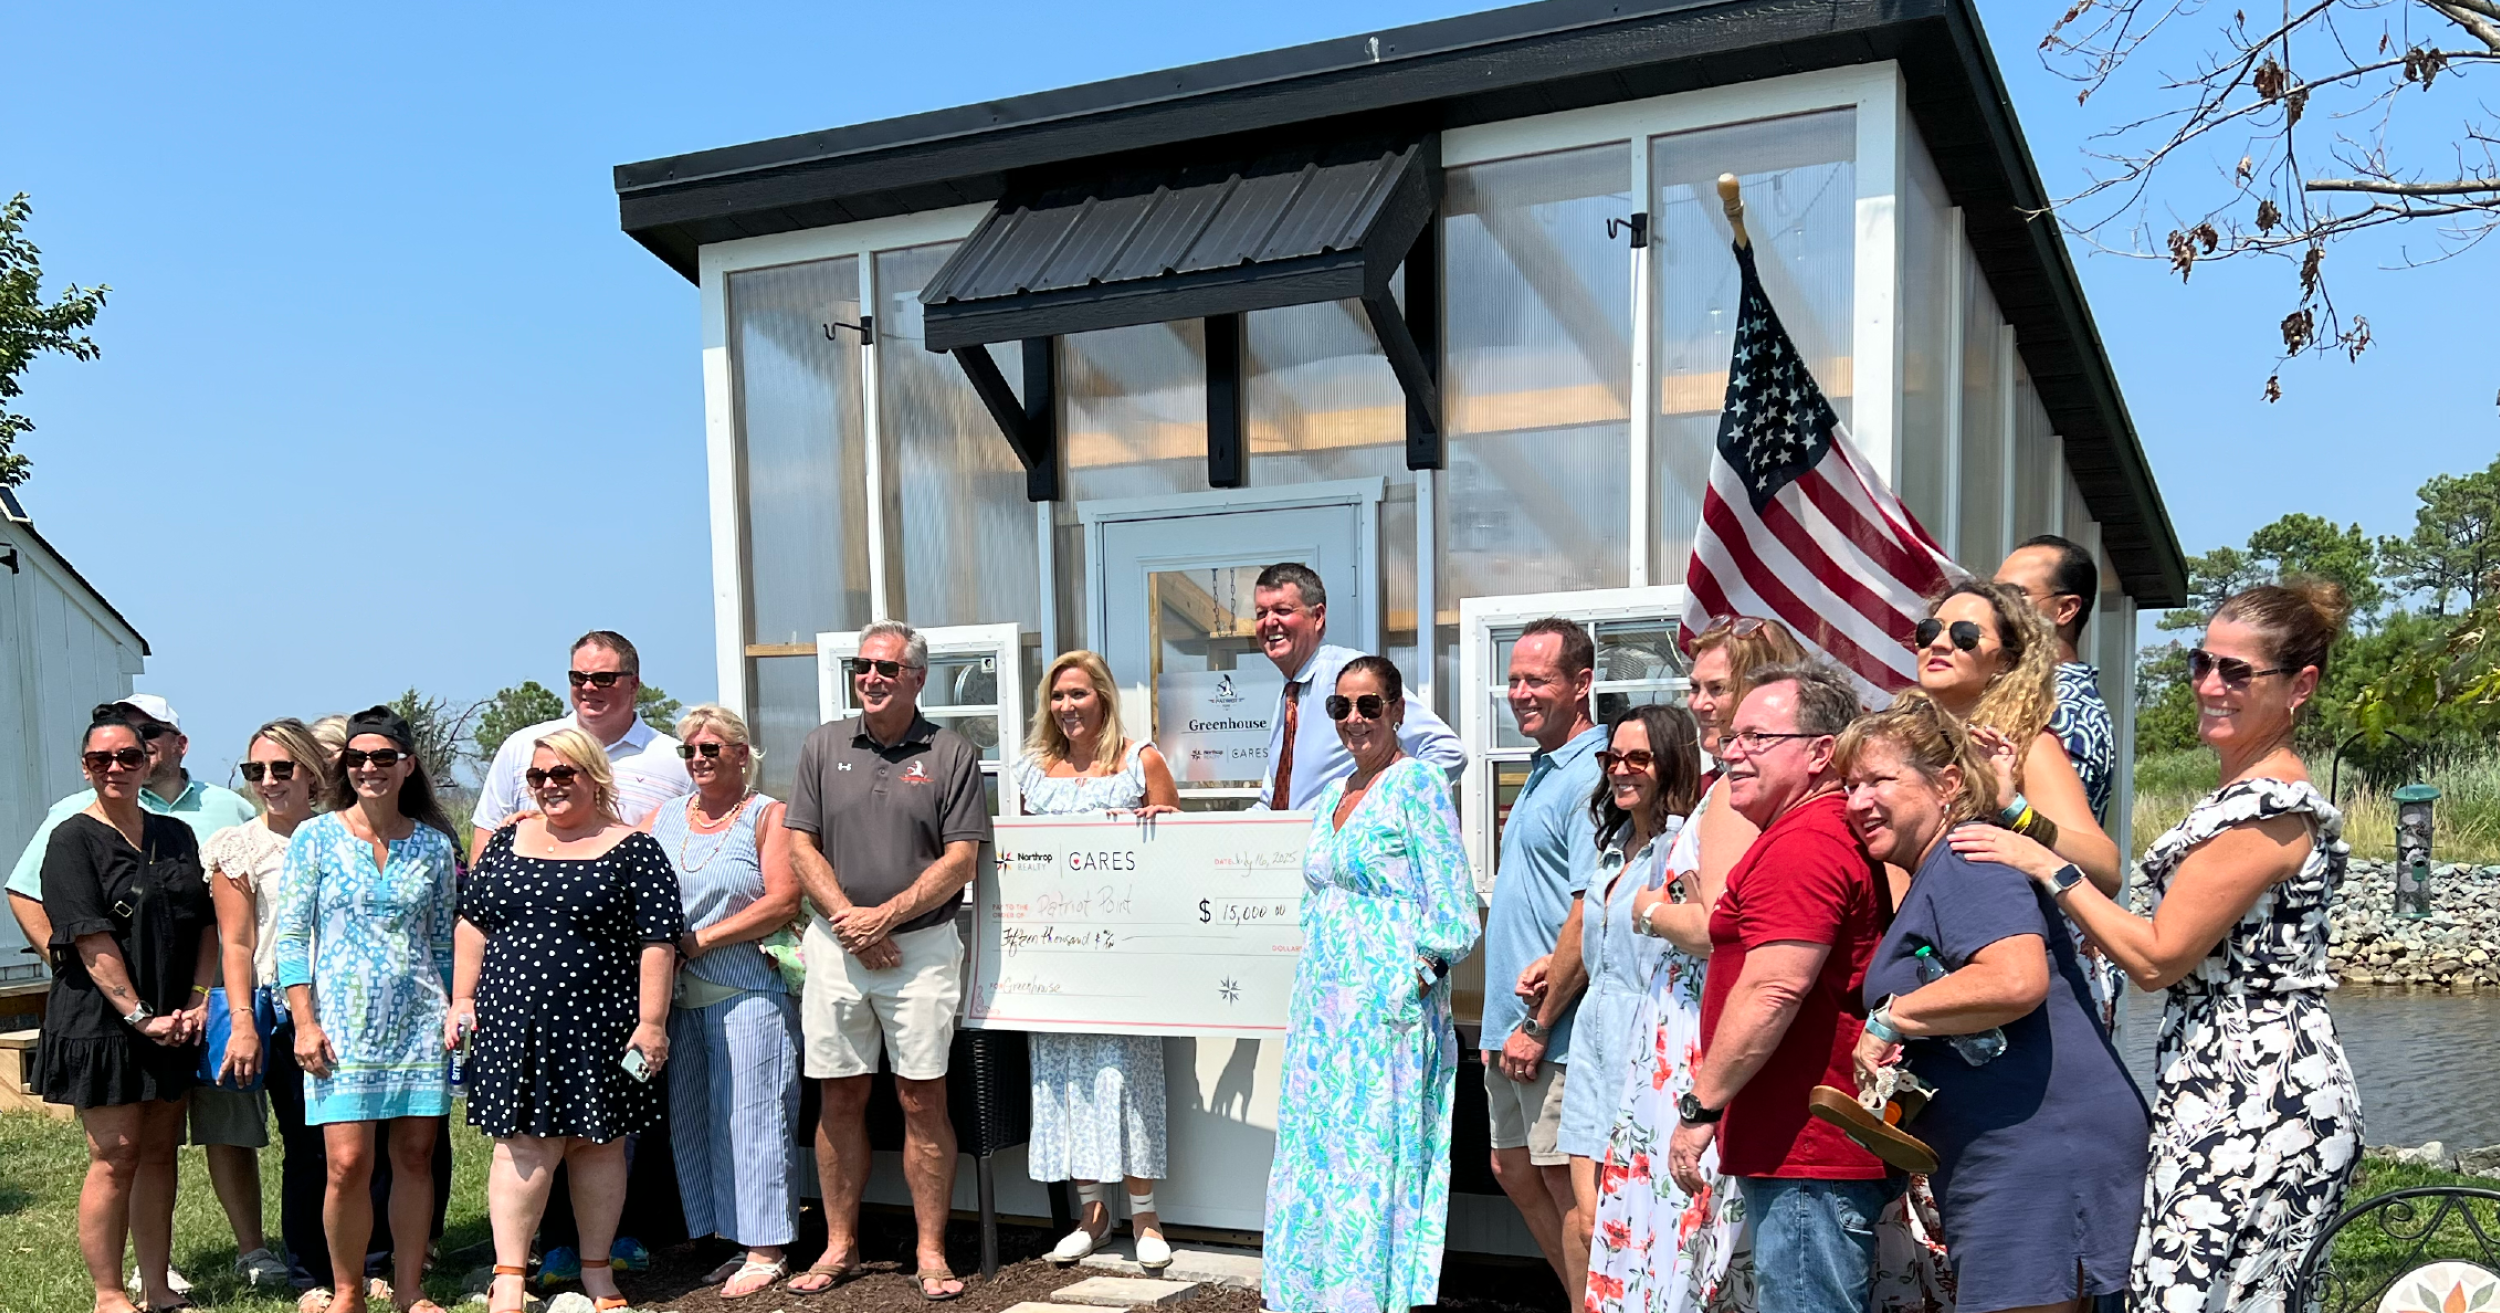 Northrop Realty Cares & The Tayman Team with Prosperity Home Mortgage Sponsor Greenhouse Project at Patriot Point in Maryland